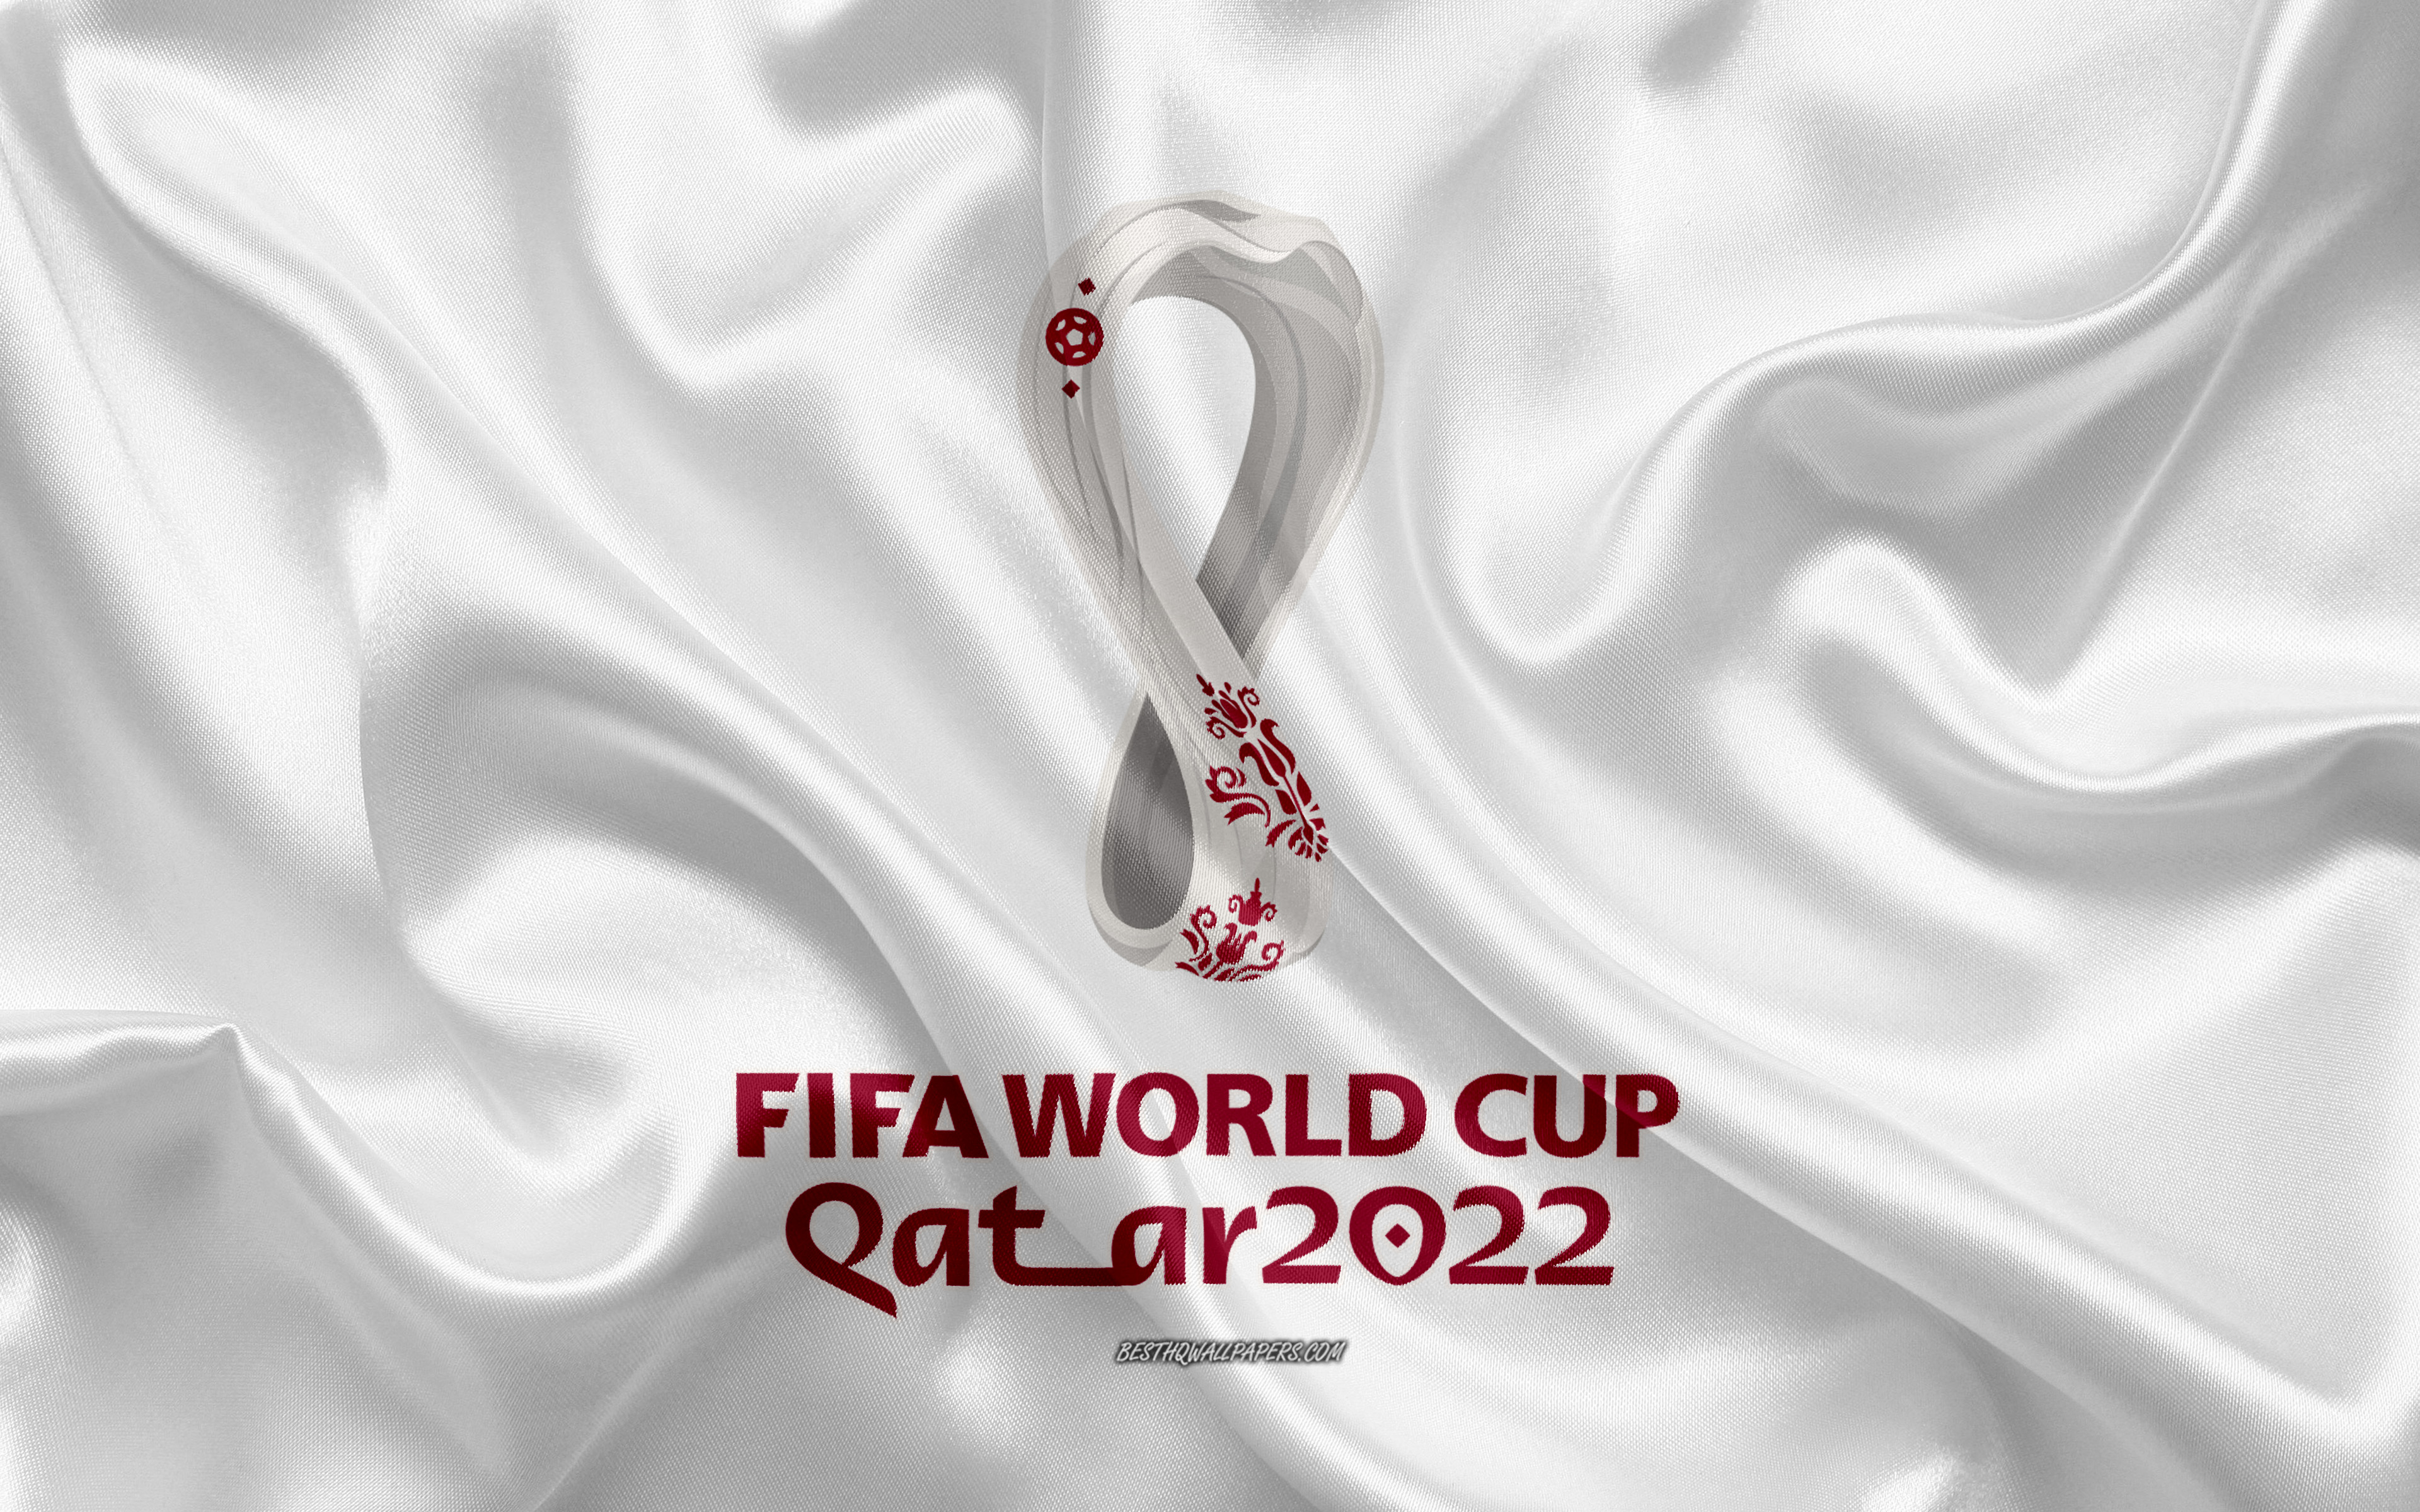 Download wallpapers 2022 FIFA World Cup, 4k, Qatar 2022, white silk  texture, Qatar 2022 logo, Qatar 2022 emblem, 2022 FIFA World Cup logo,  soccer for desktop with resolution 1024x1024. High Quality HD pictures  wallpapers